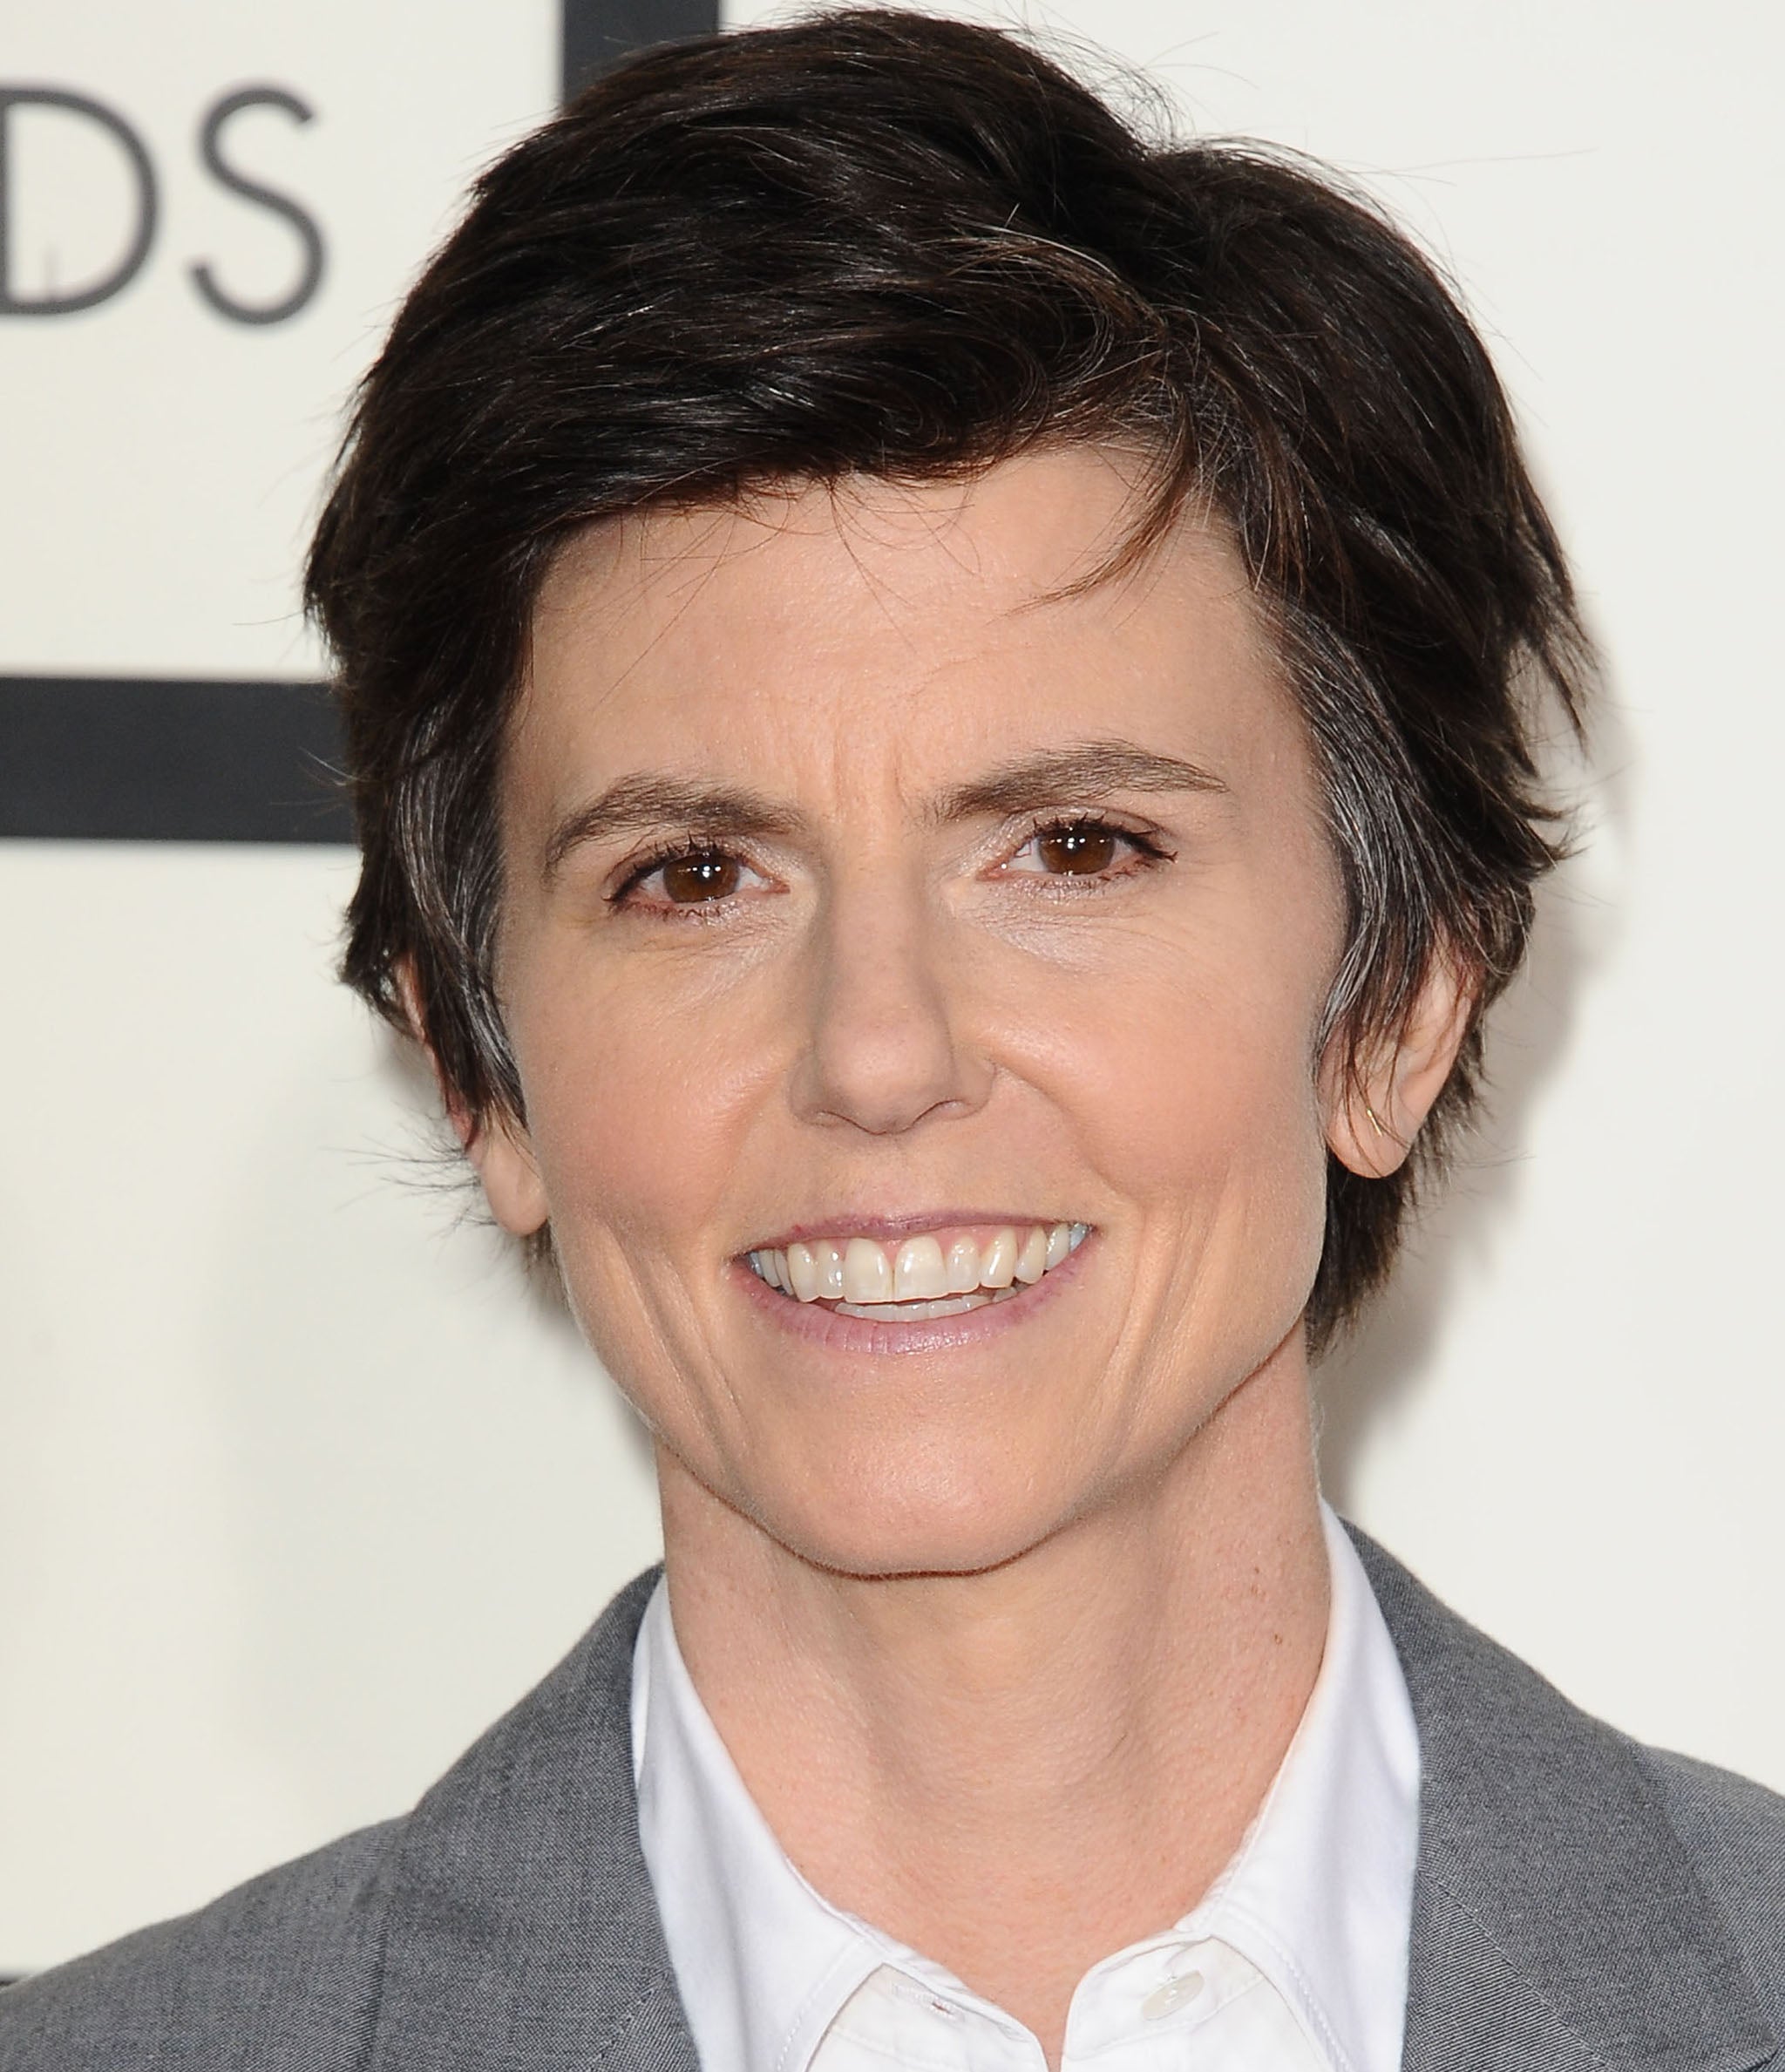 The American stand-up Tig Notaro, who performed topless this week